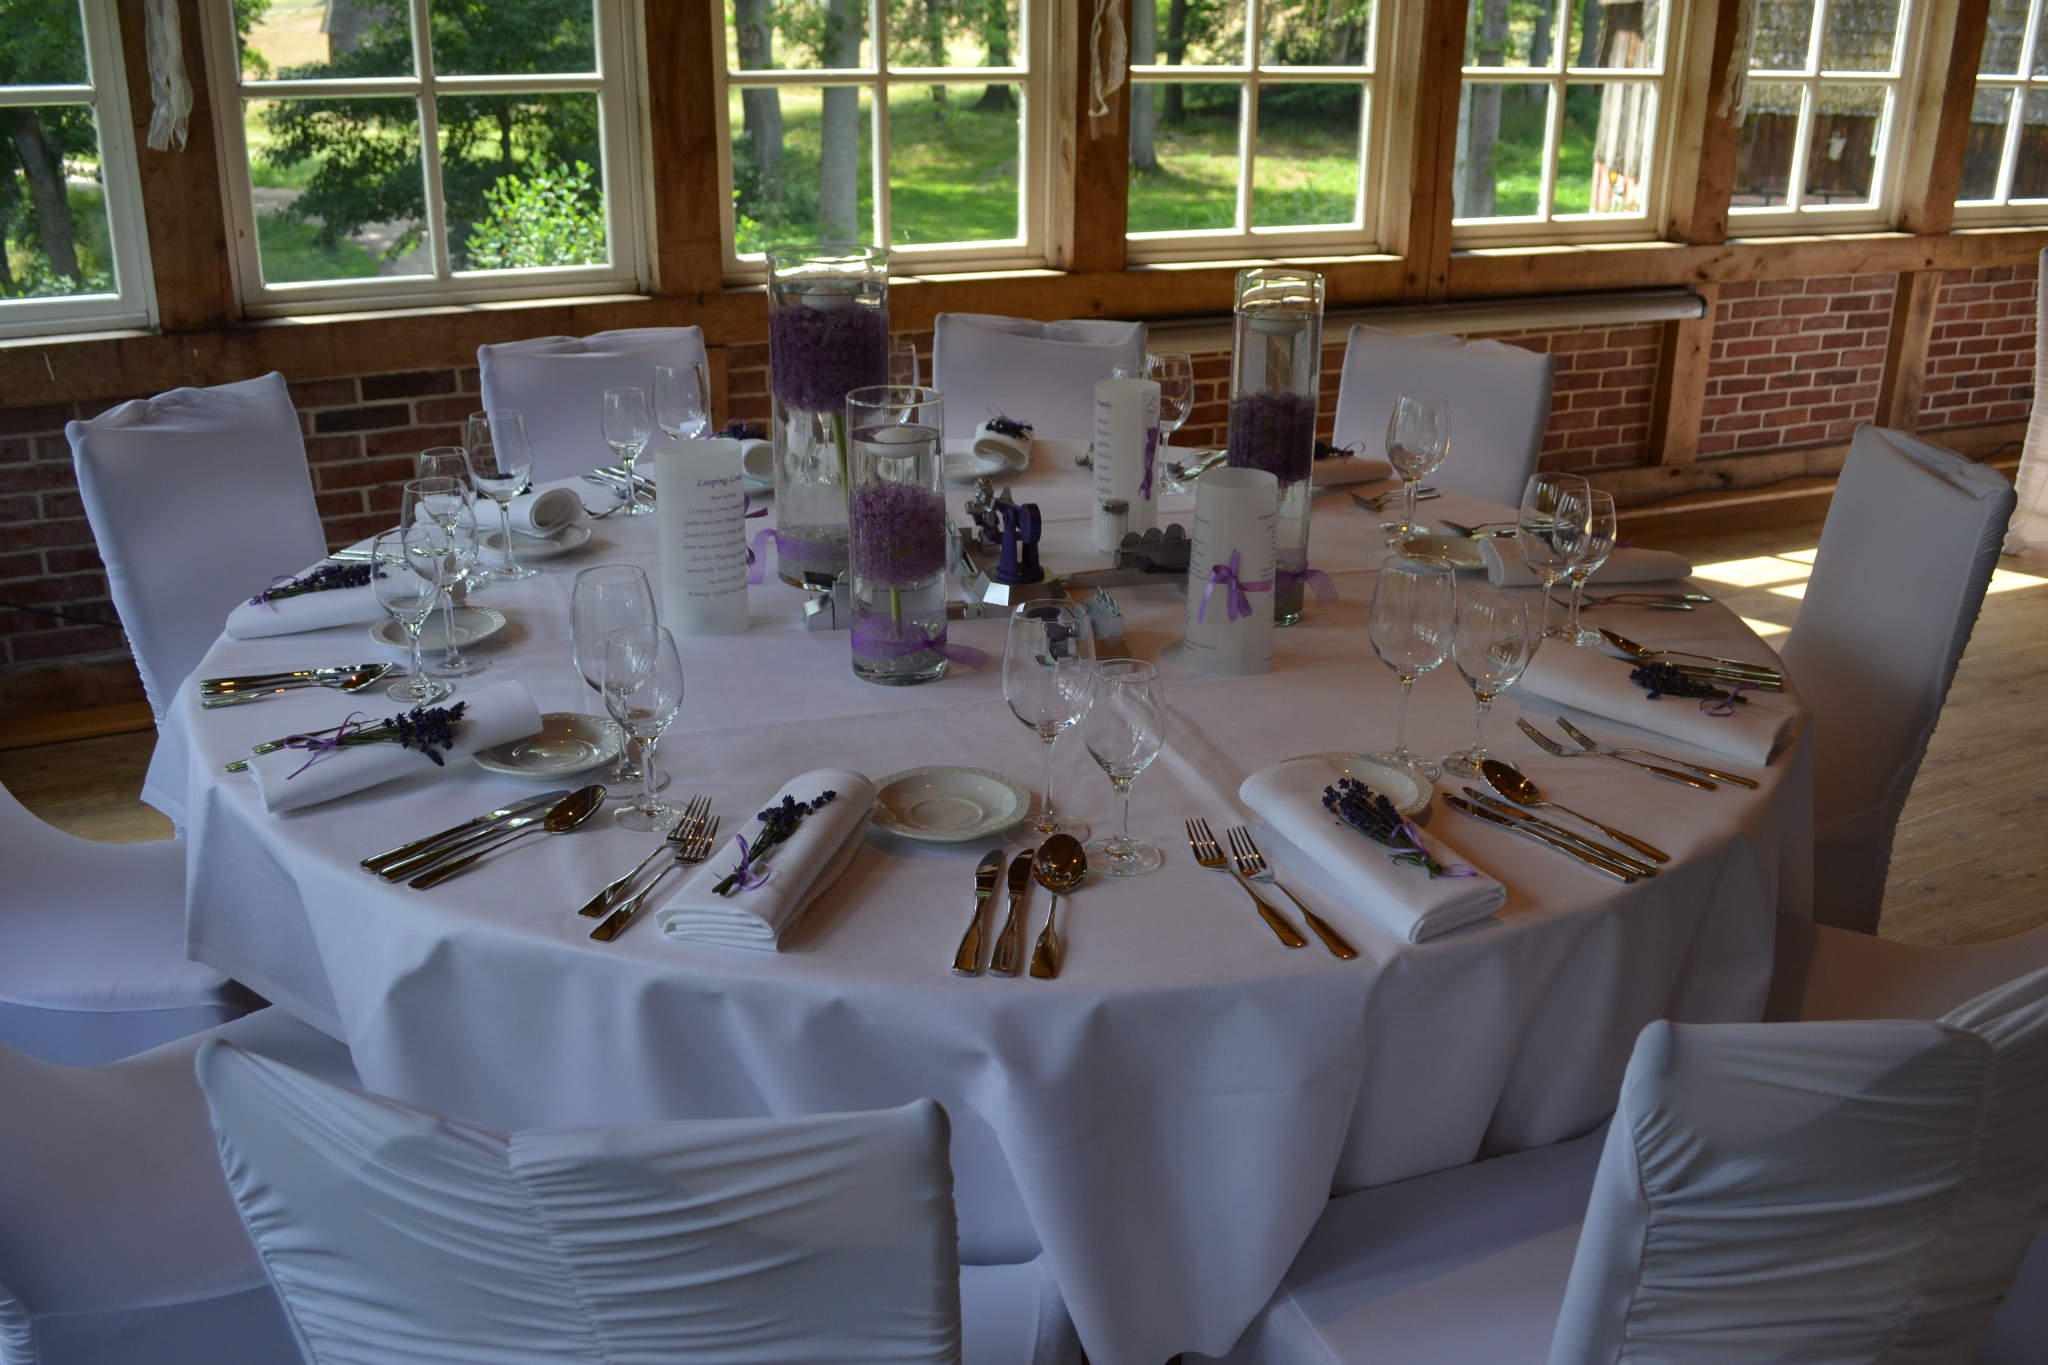 Wedding at the Haverbeckhof: Festive table decoration in lavender and white